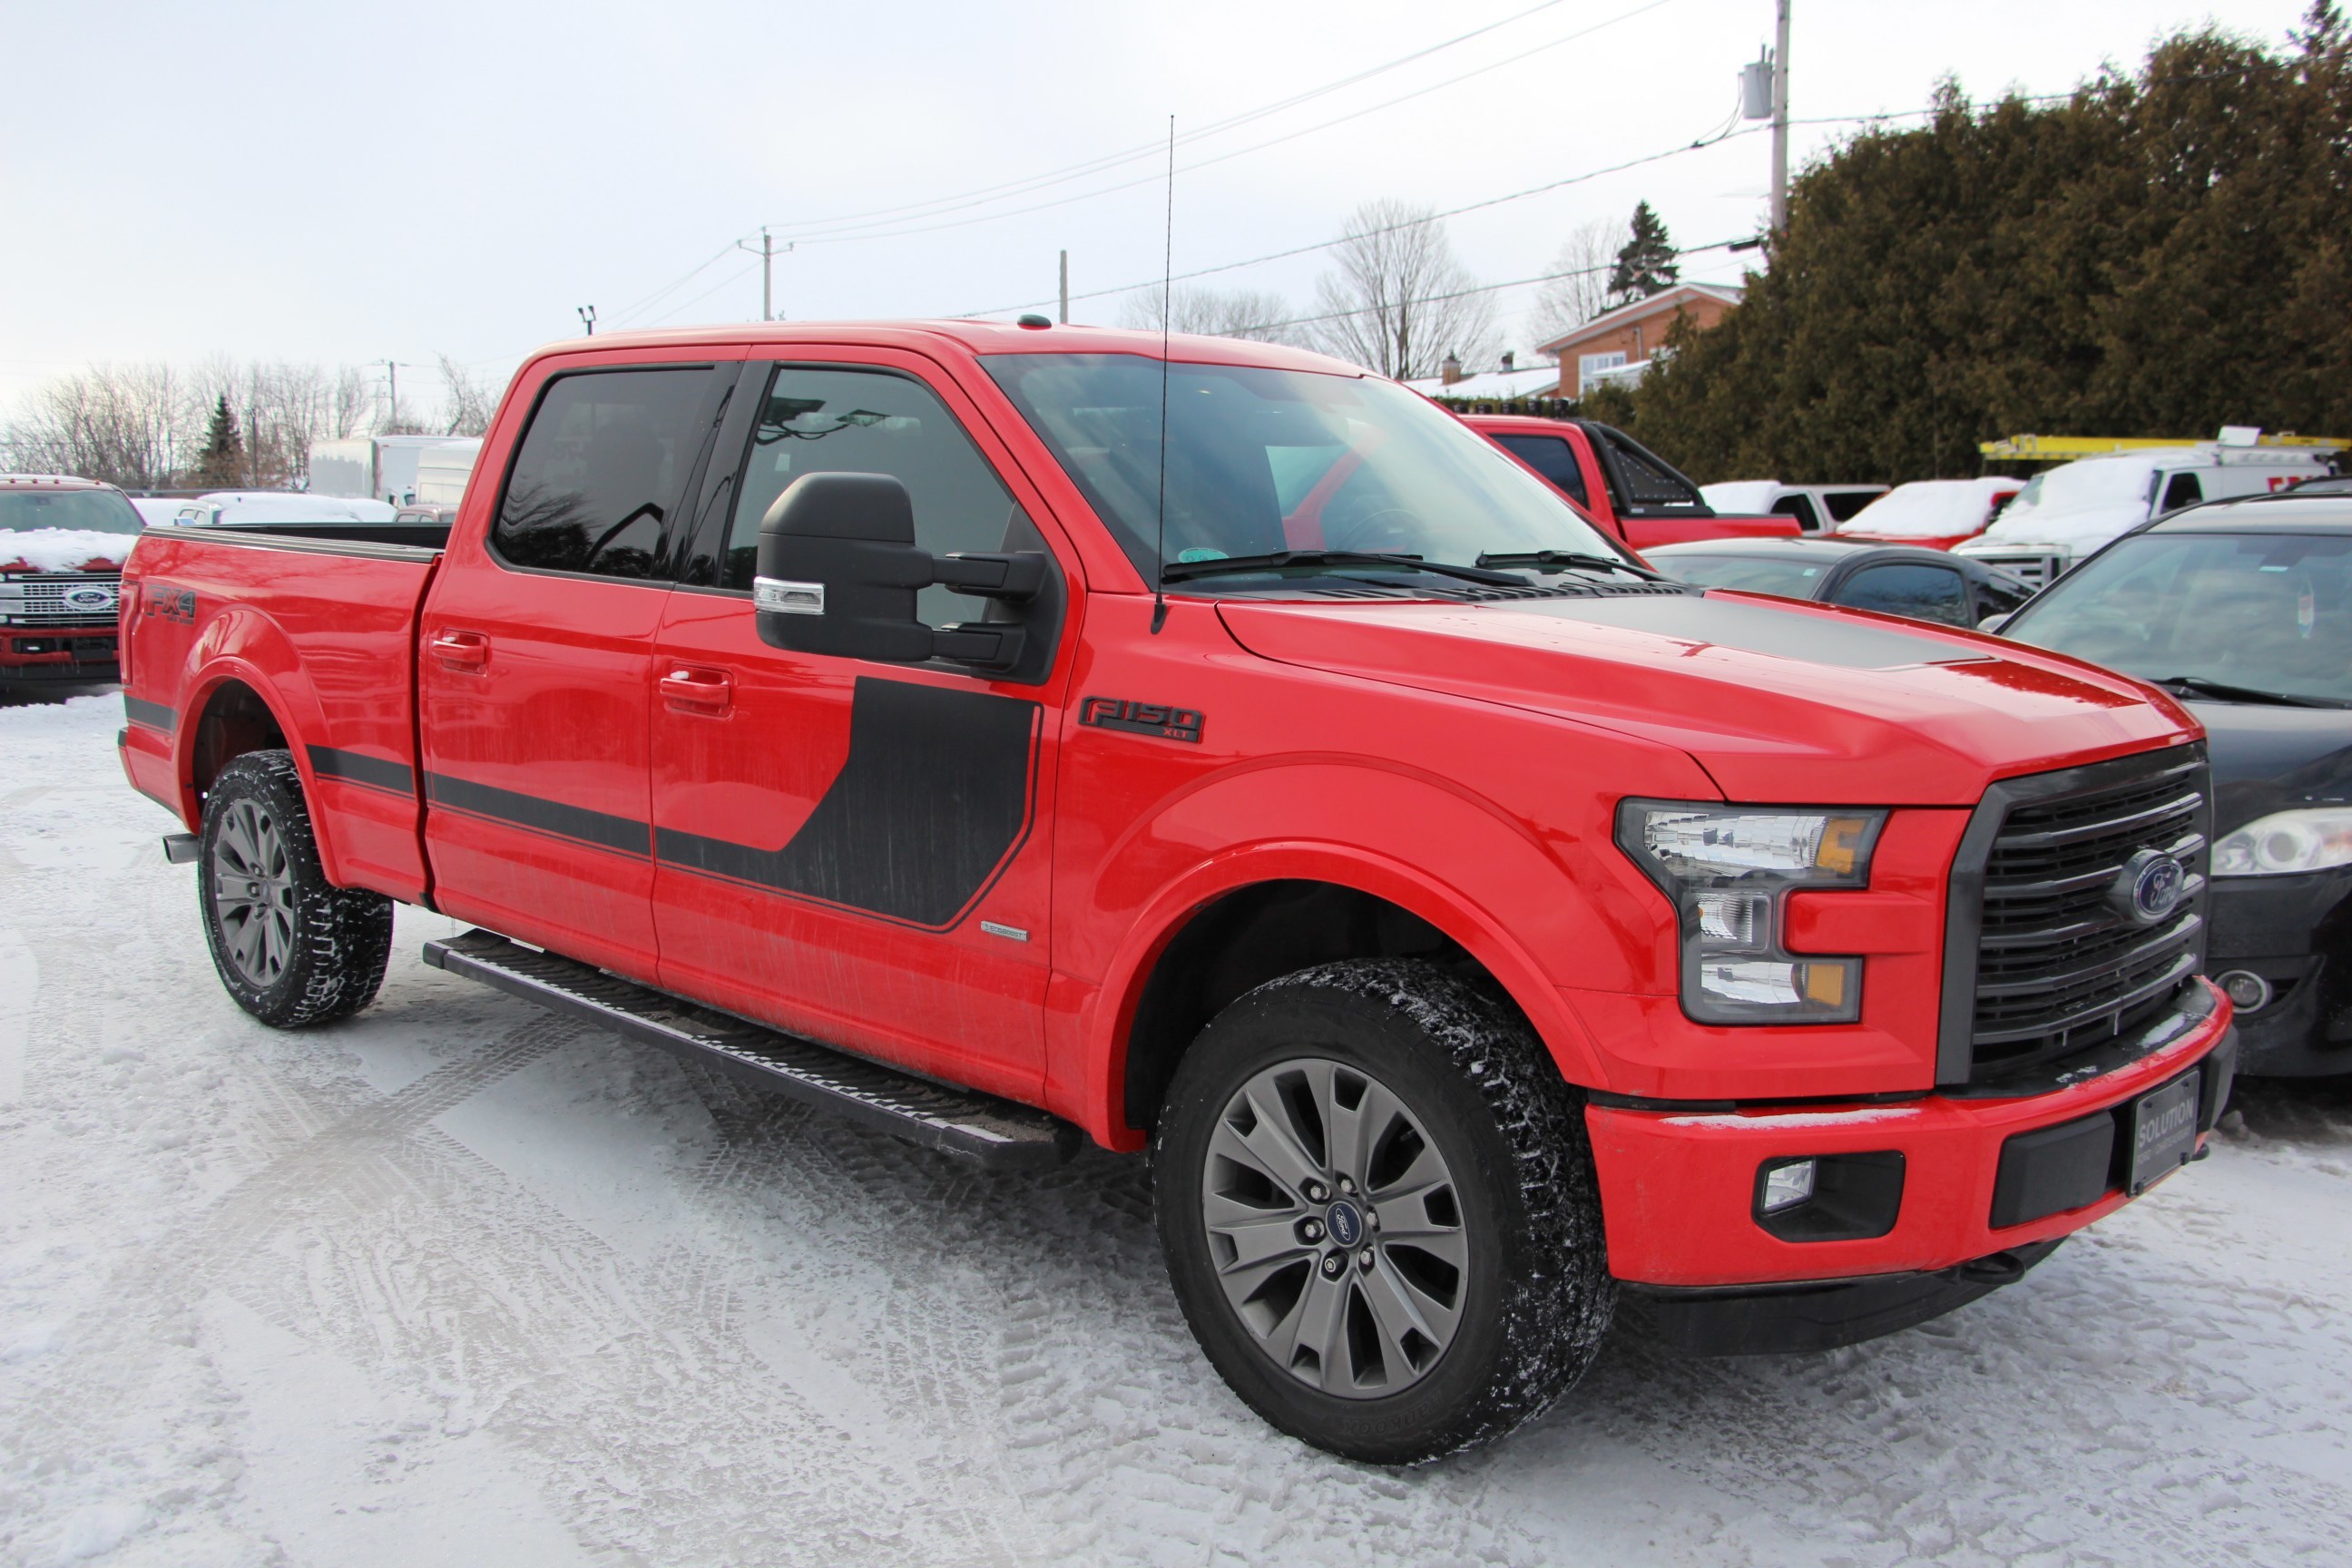  Ford F-150 XLT éDITION SP